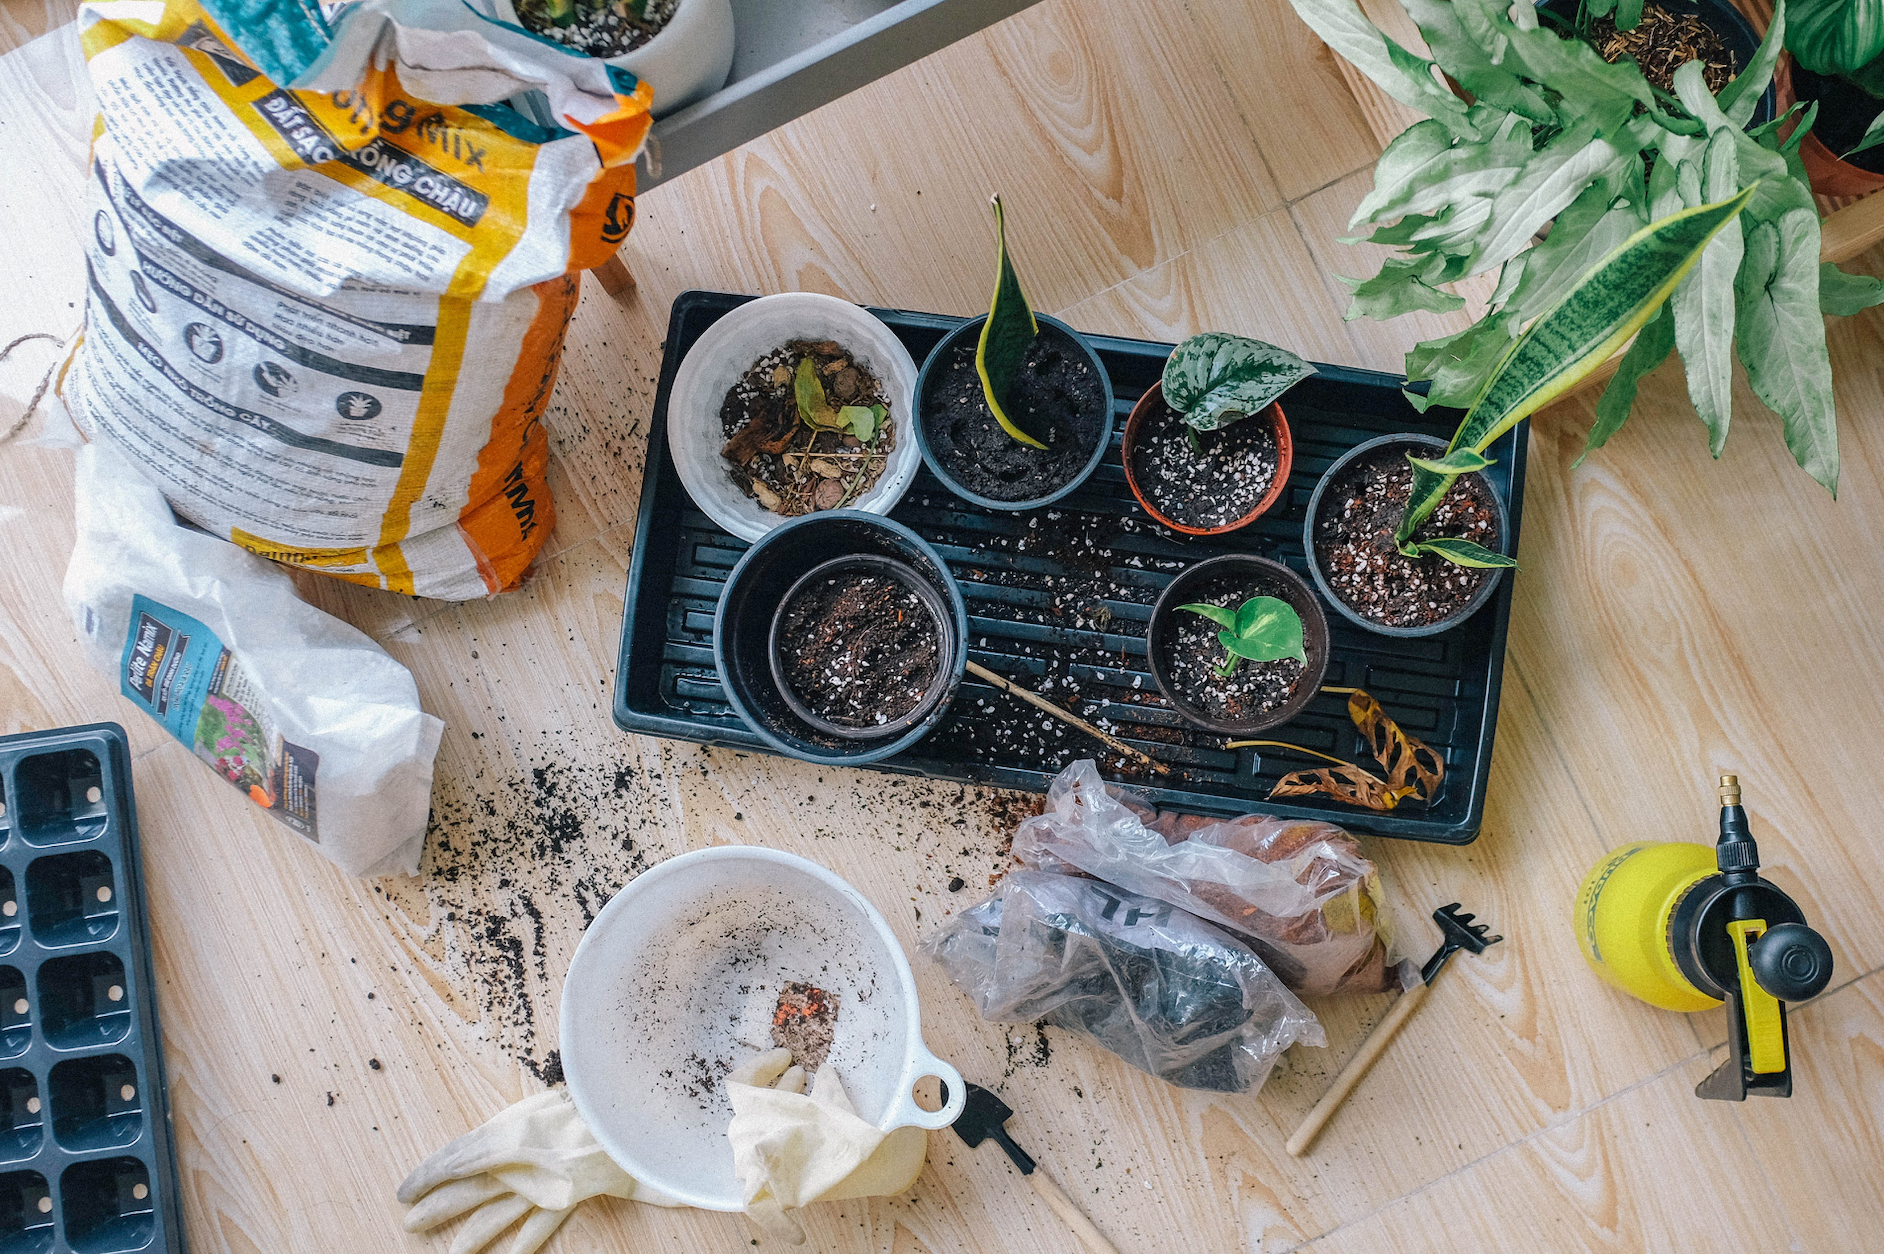 All about plant propagation